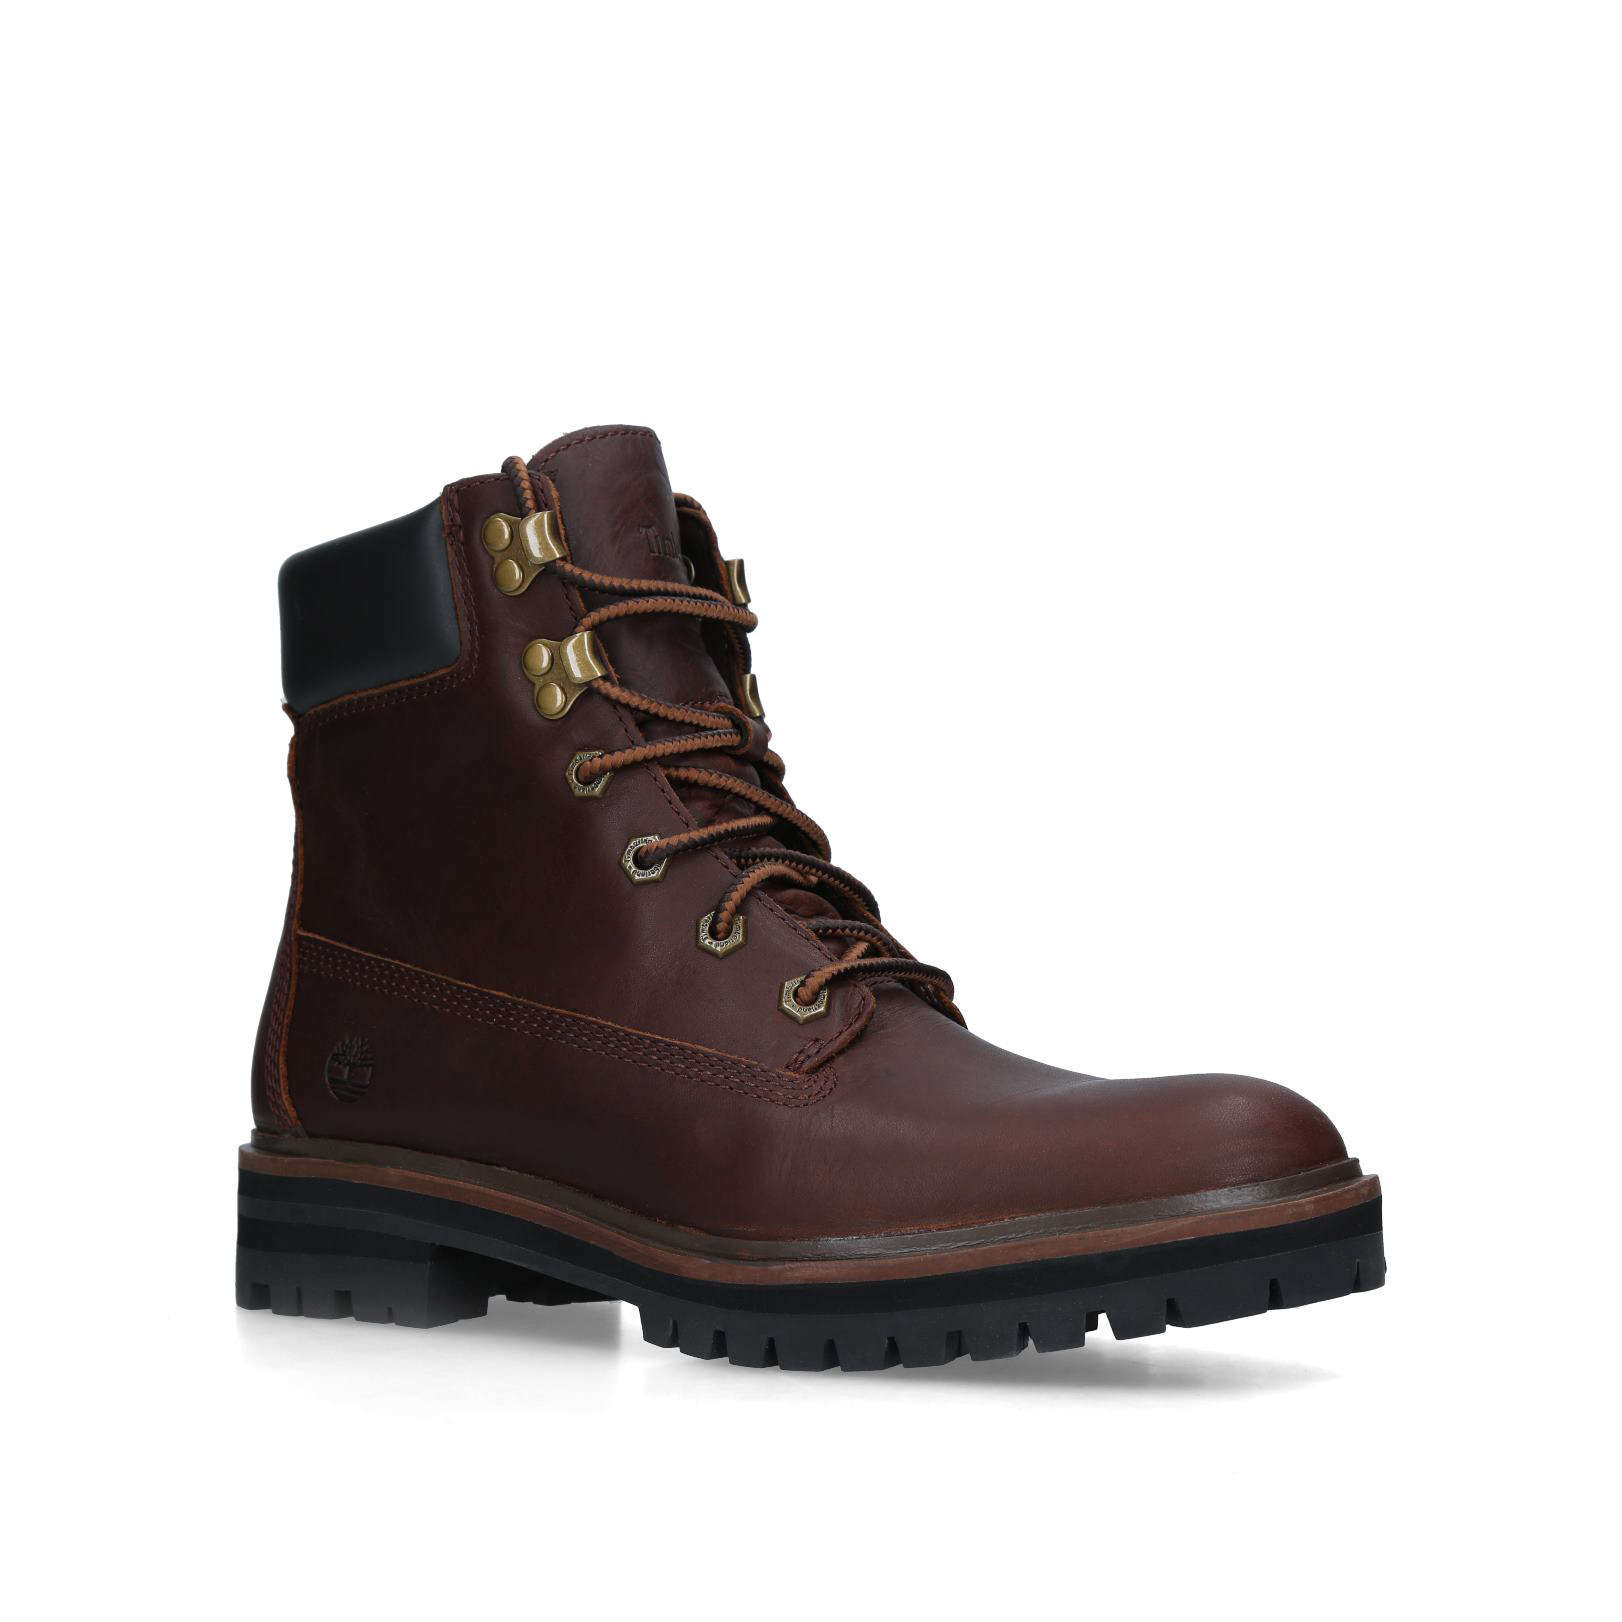 CLASSIC PADDED COLLAR - TIMBERLAND Ankle Boots